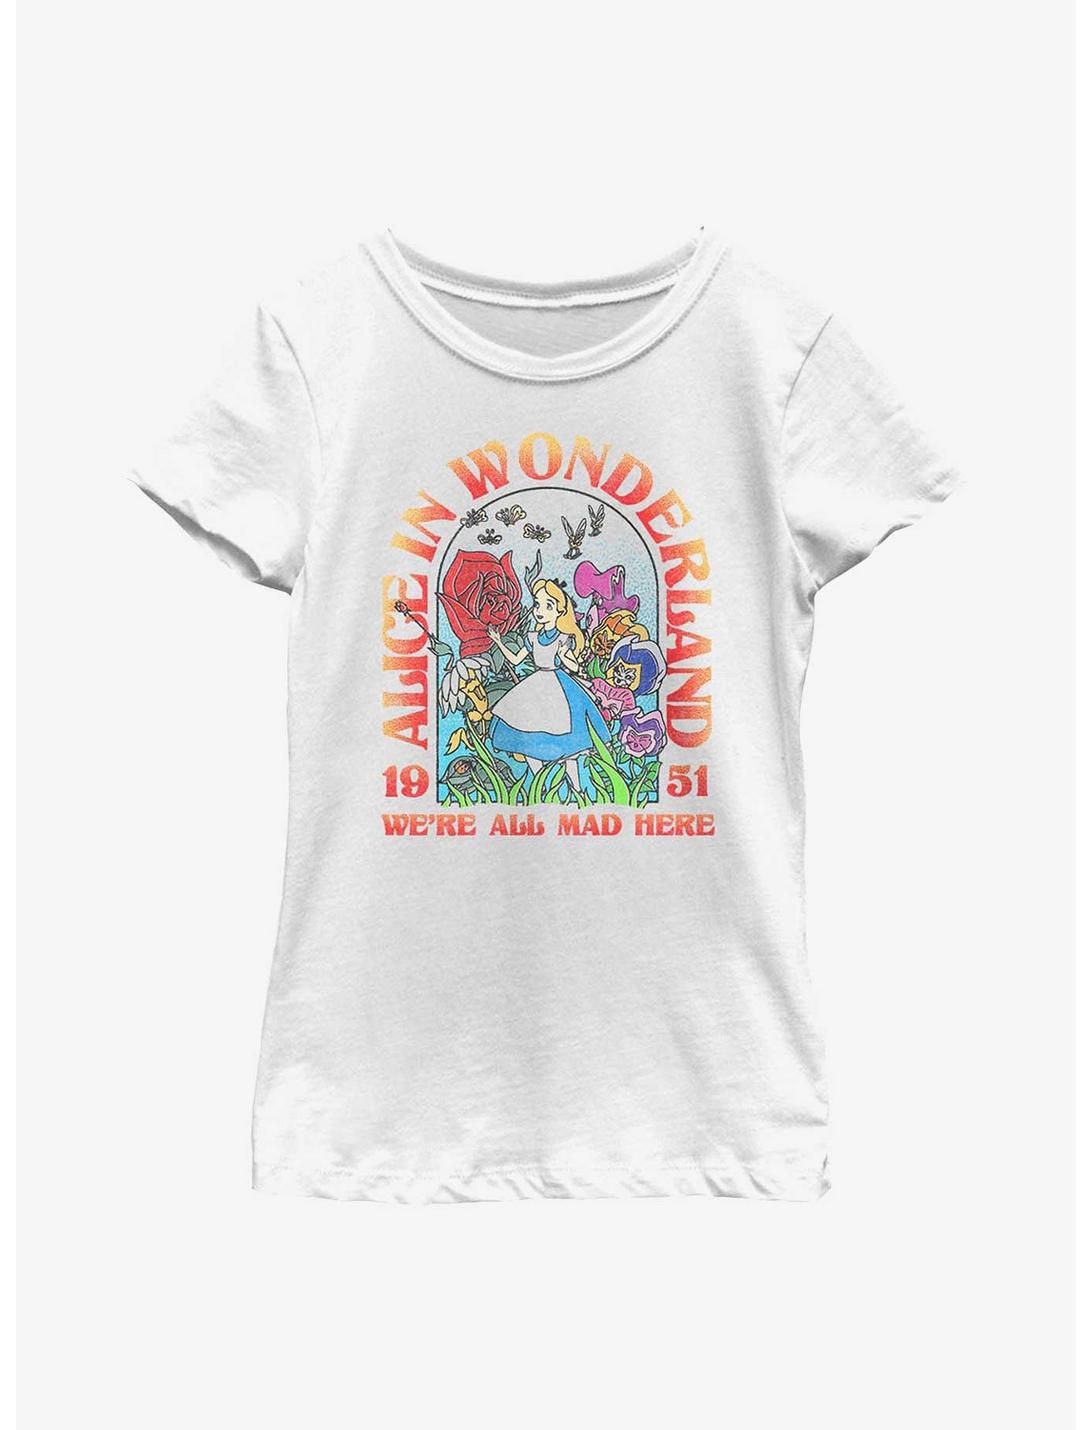 Disney Alice In Wonderland 1951 We're All Mad Here Youth Girls T-Shirt, WHITE, hi-res